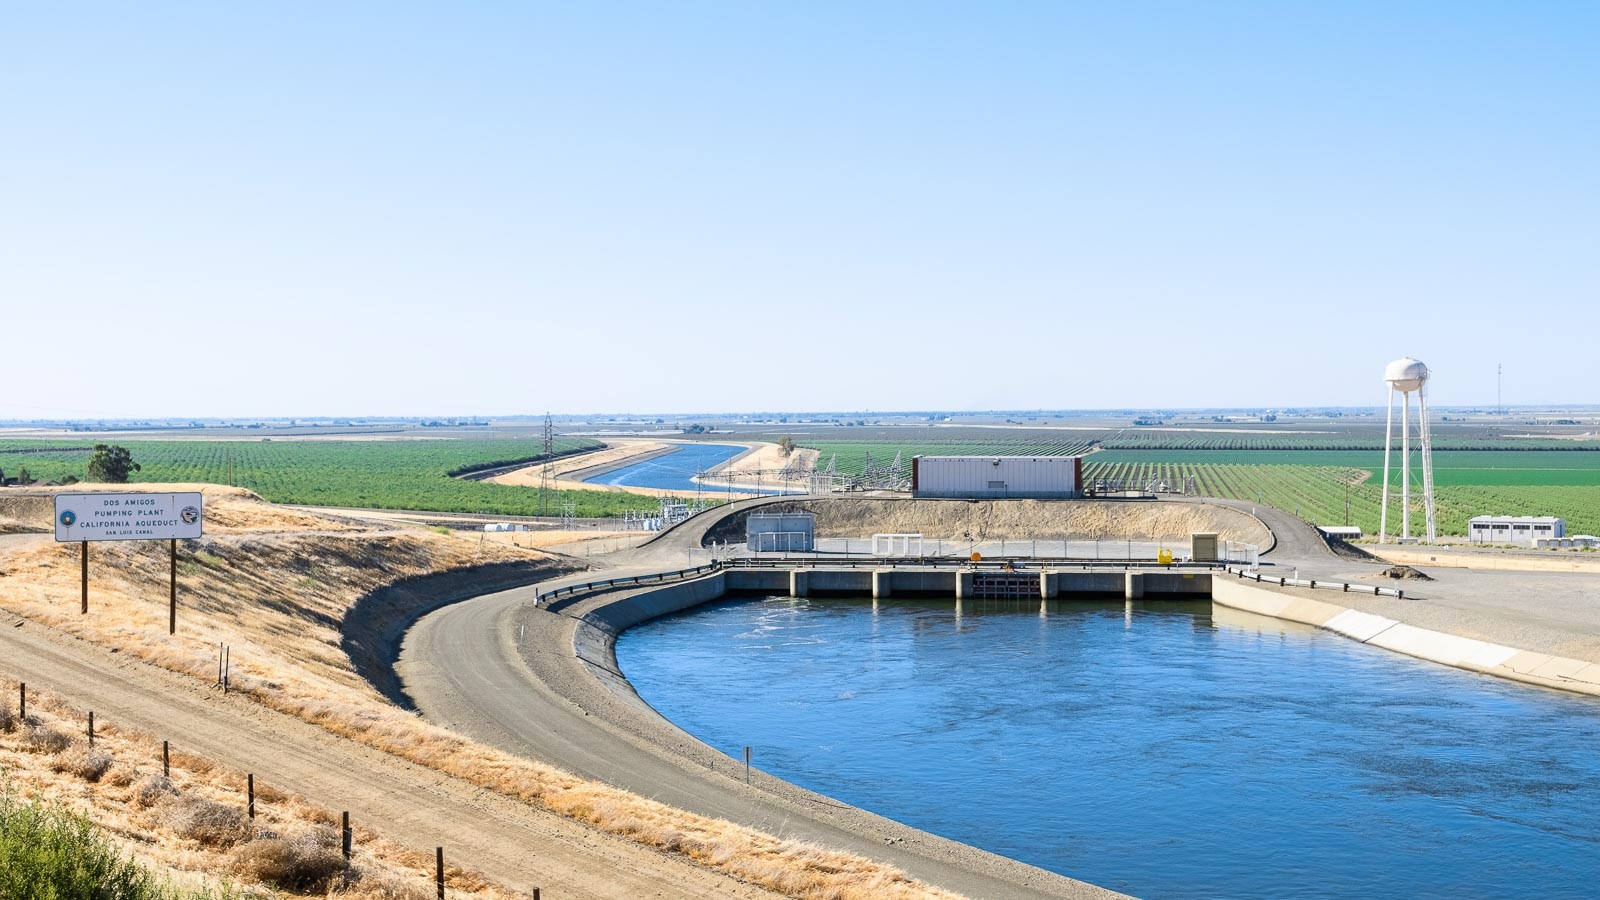 This pumping plant in California pushes water up hill. (Image by Sundry Photography/Shutterstock.)